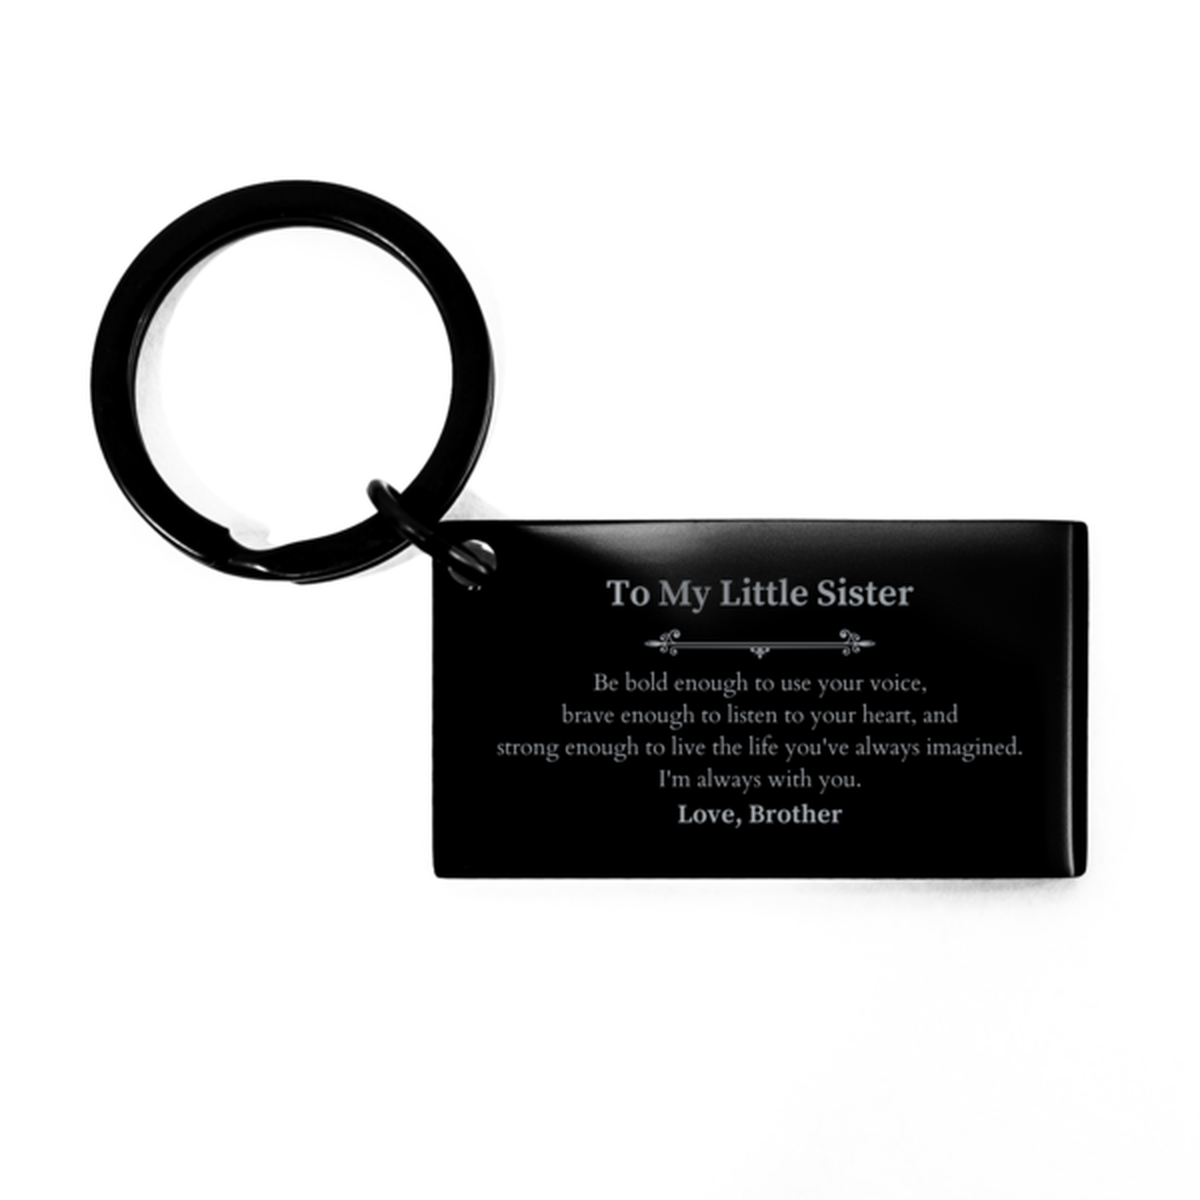 Keepsake Little Sister Keychain Gift Idea Graduation Christmas Birthday Little Sister from Brother, Little Sister Be bold enough to use your voice, brave enough to listen to your heart. Love, Brother